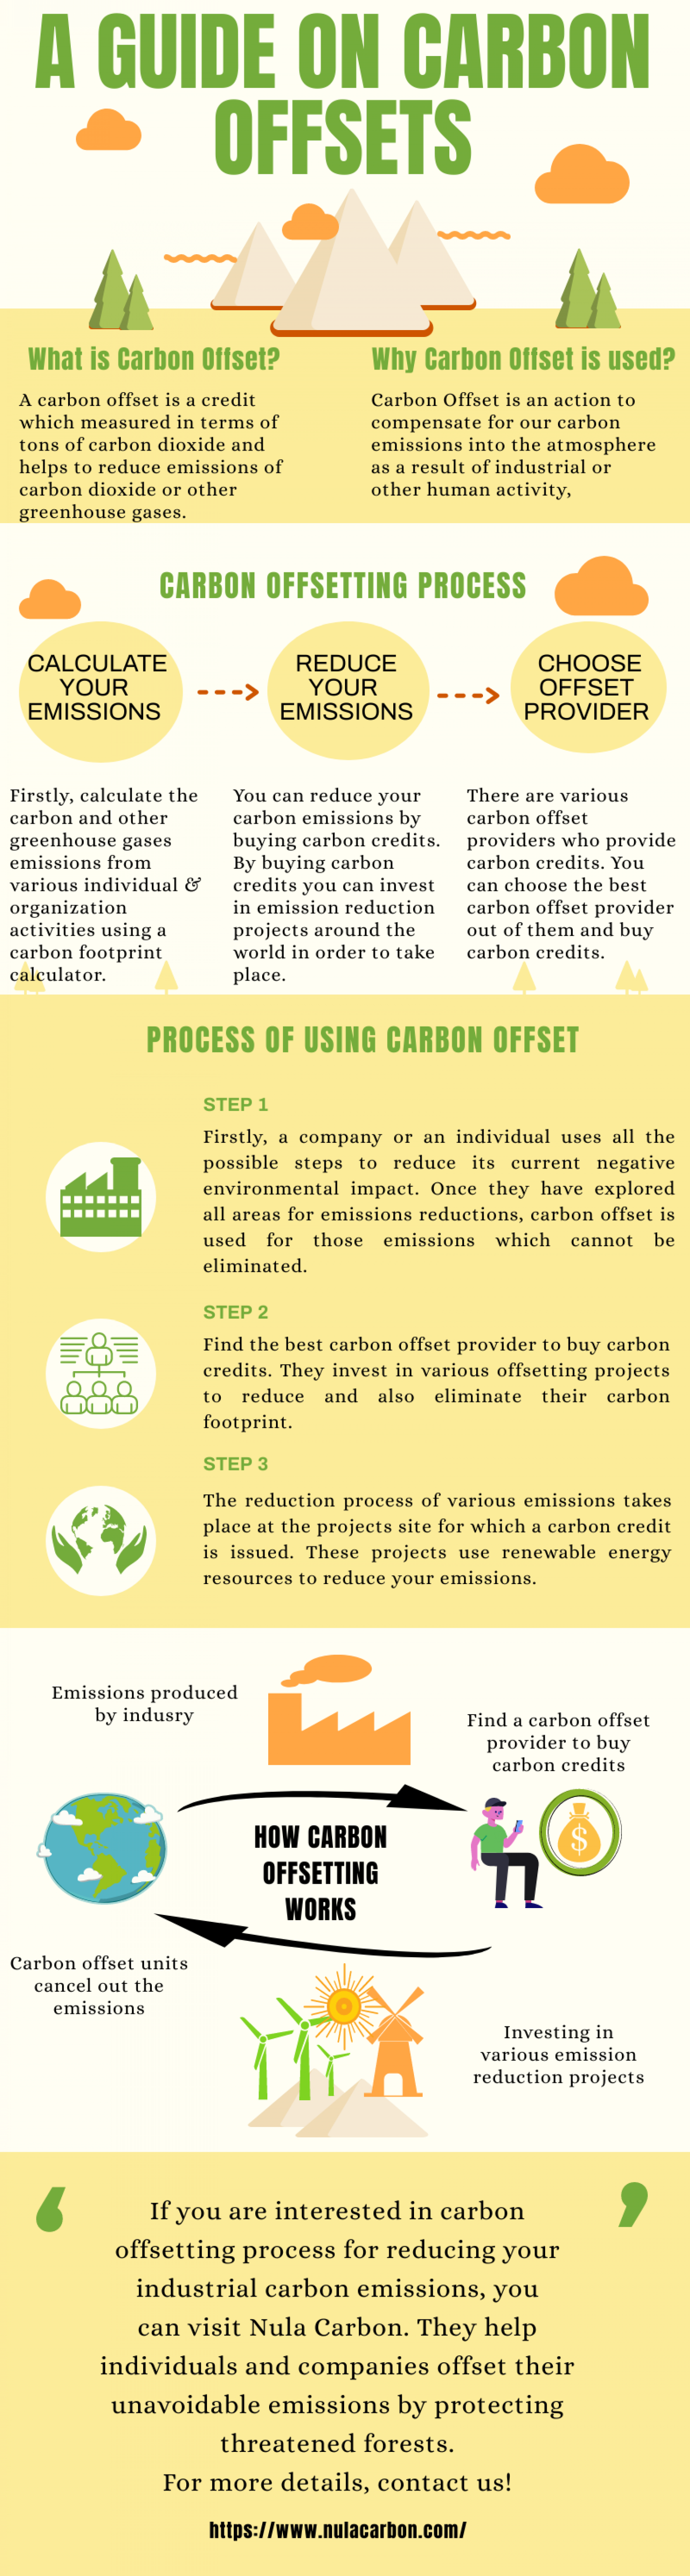 A Guide on Carbon Offsets Infographic